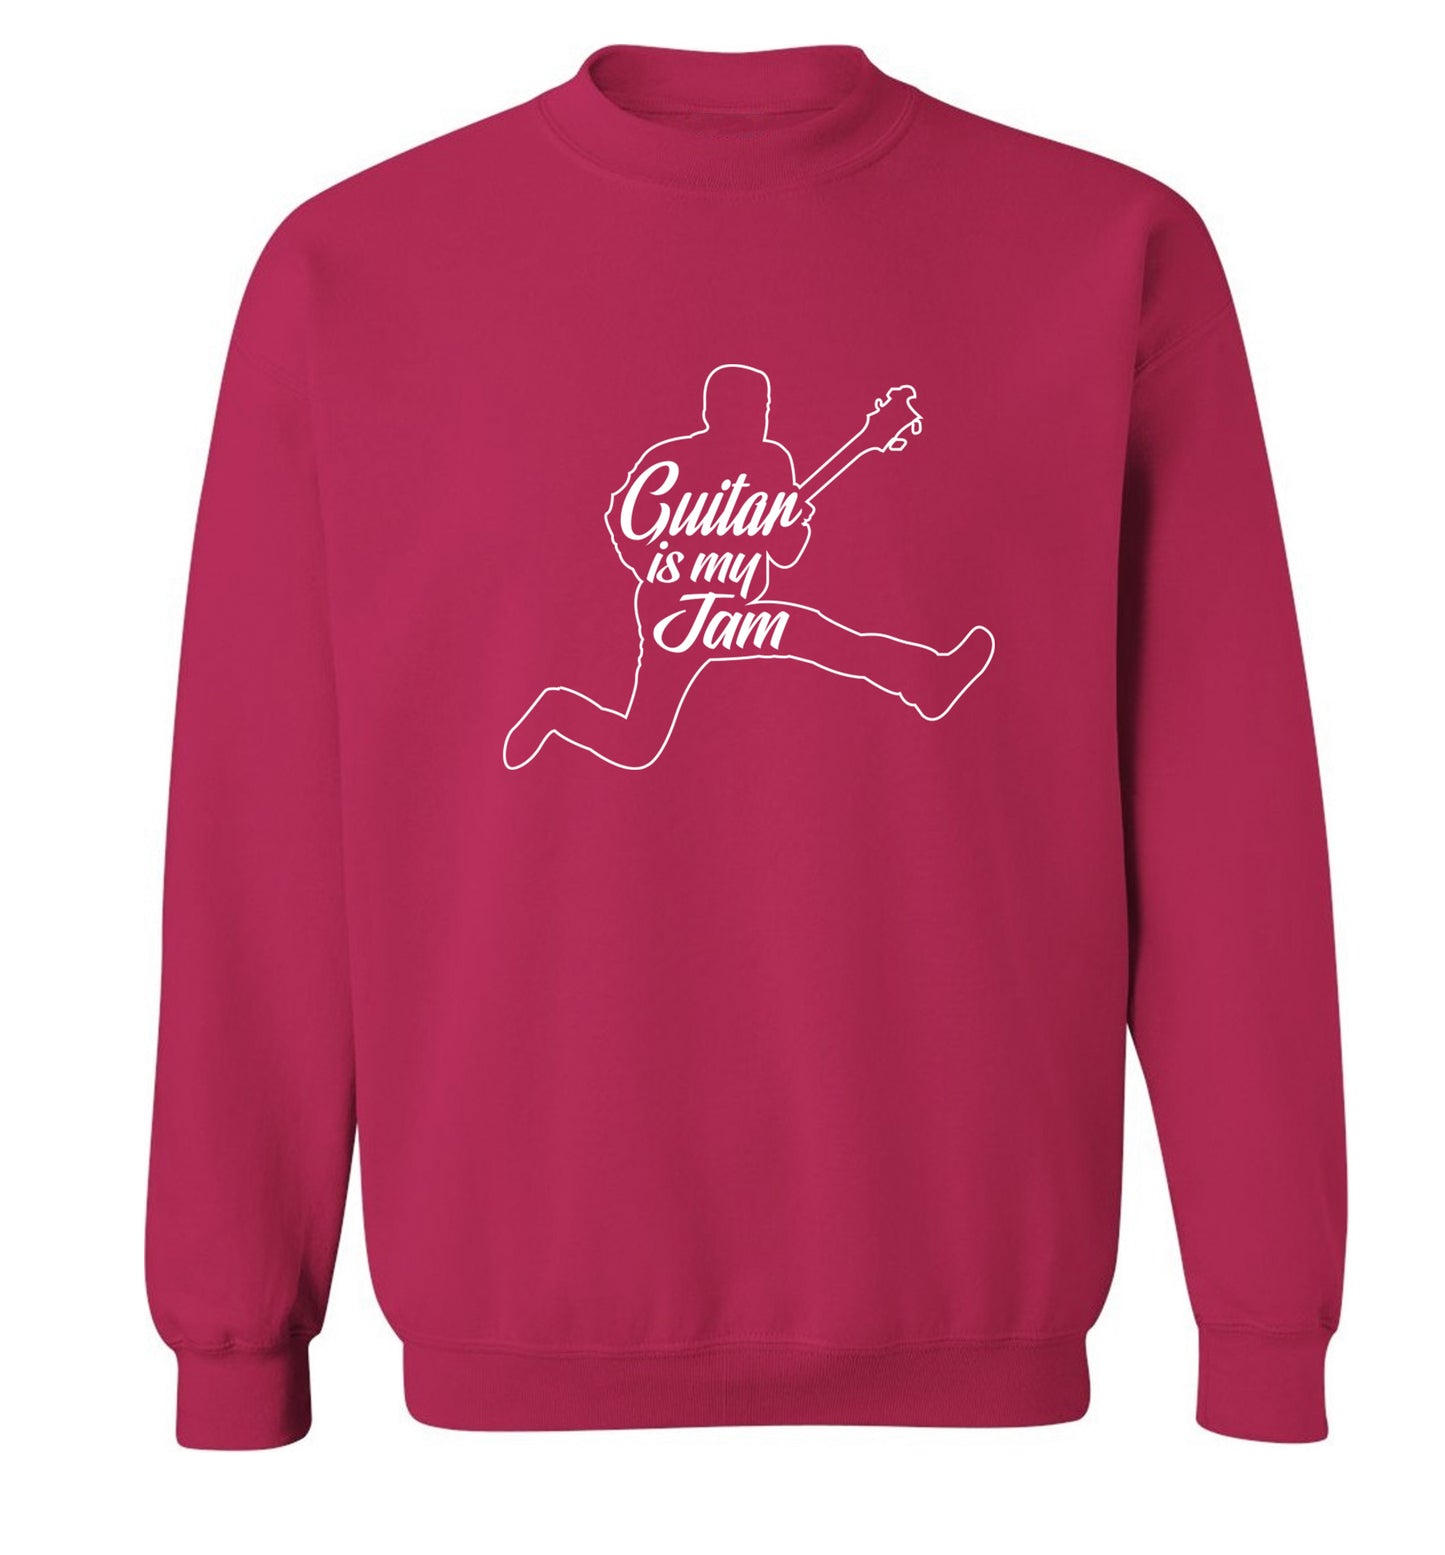 Guitar is my jam Adult's unisex pink Sweater 2XL